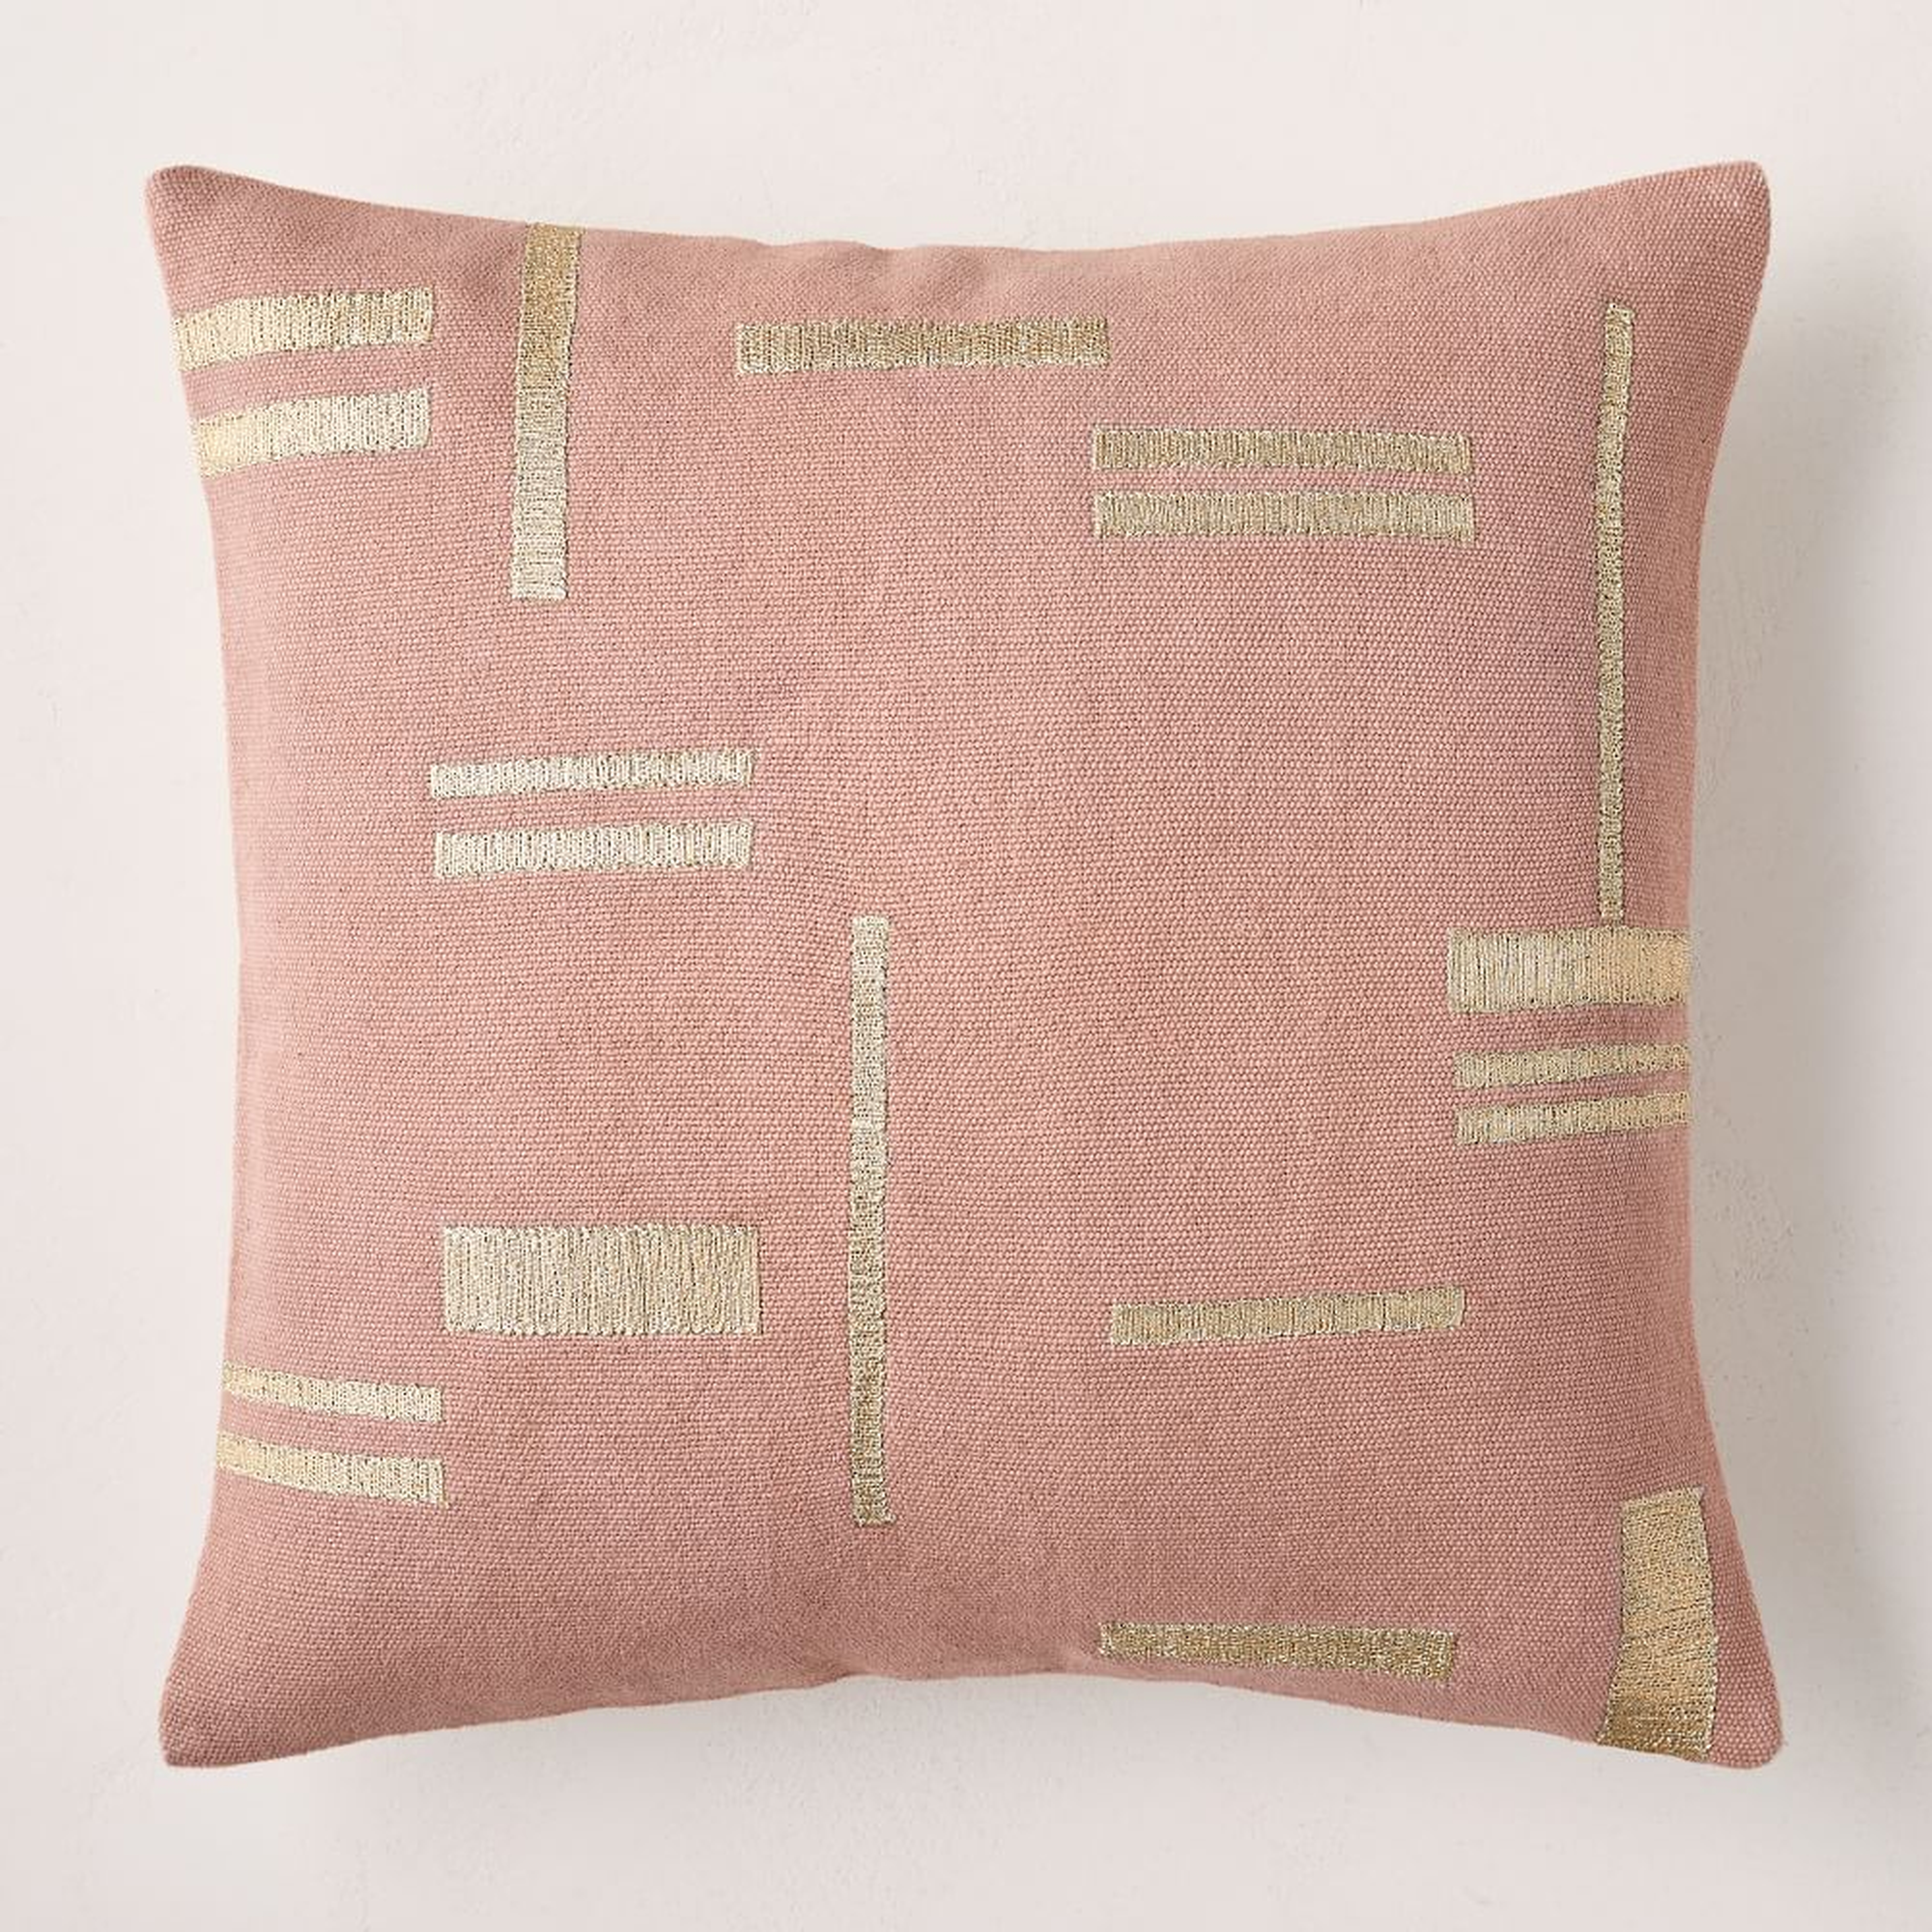 Embroidered Metallic Blocks Pillow Cover, 20"x20", Pink Stone - West Elm